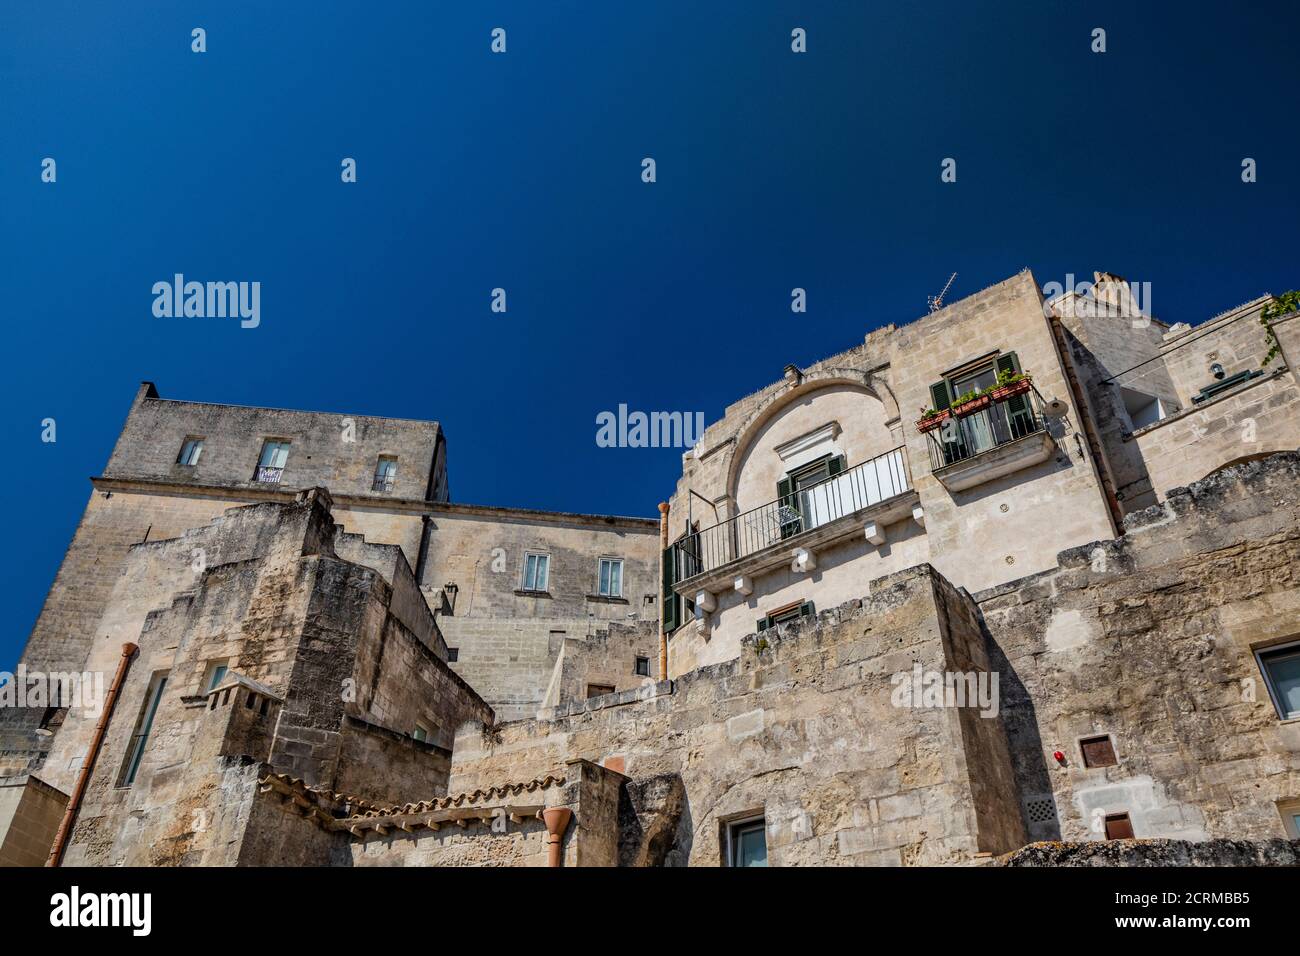 August 8, 2020 - Matera, Basilicata, Italy - The typical stone and brick houses of the old town of Matera, in the Sasso Caveoso. Stock Photo